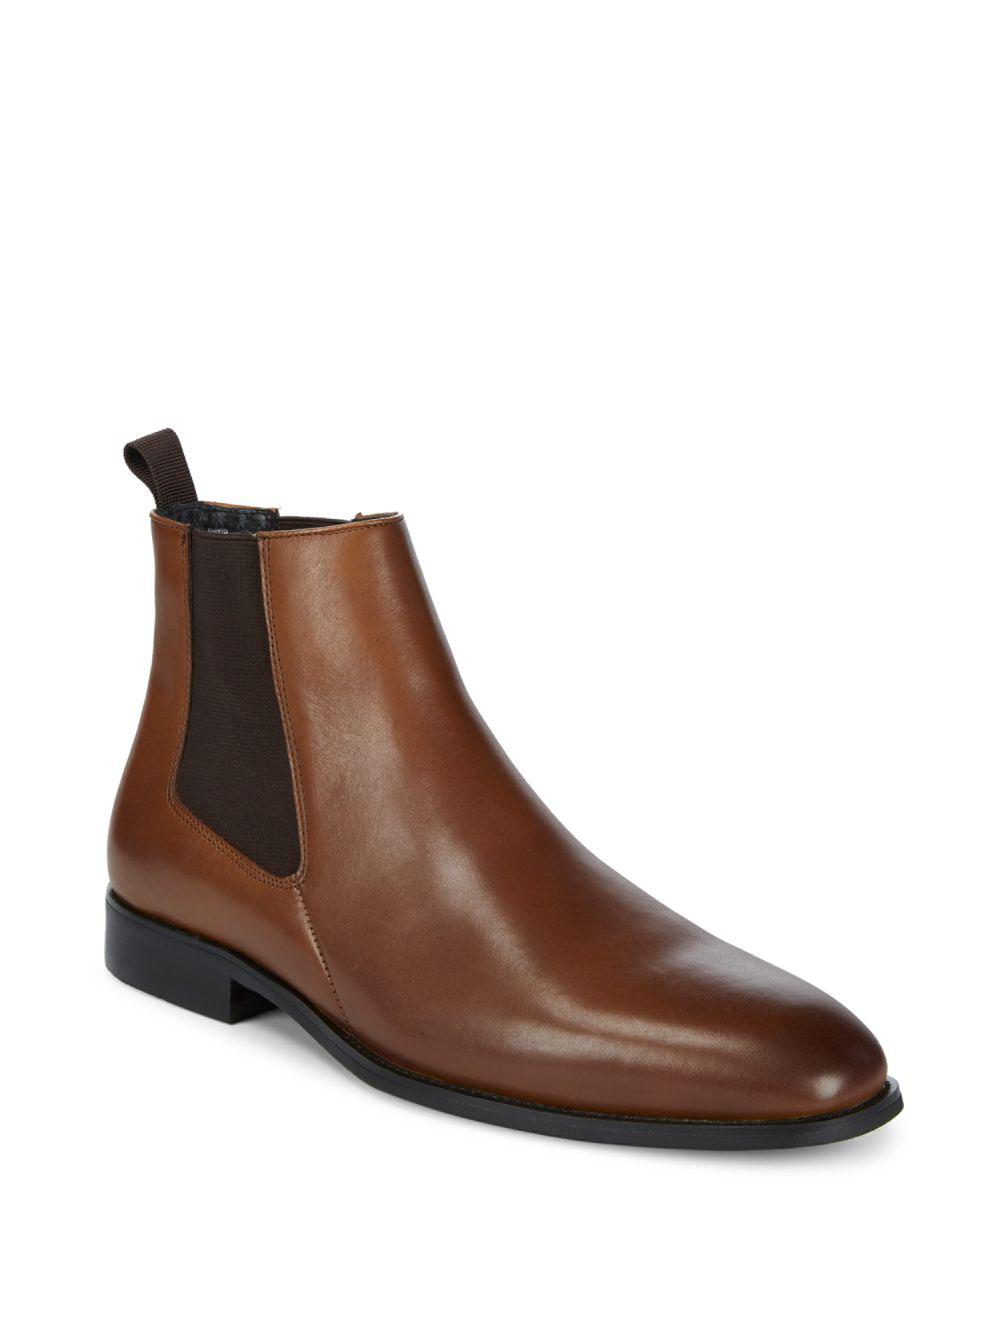 Lyst - Karl Lagerfeld Gore Leather Chelsea Boots in Brown for Men